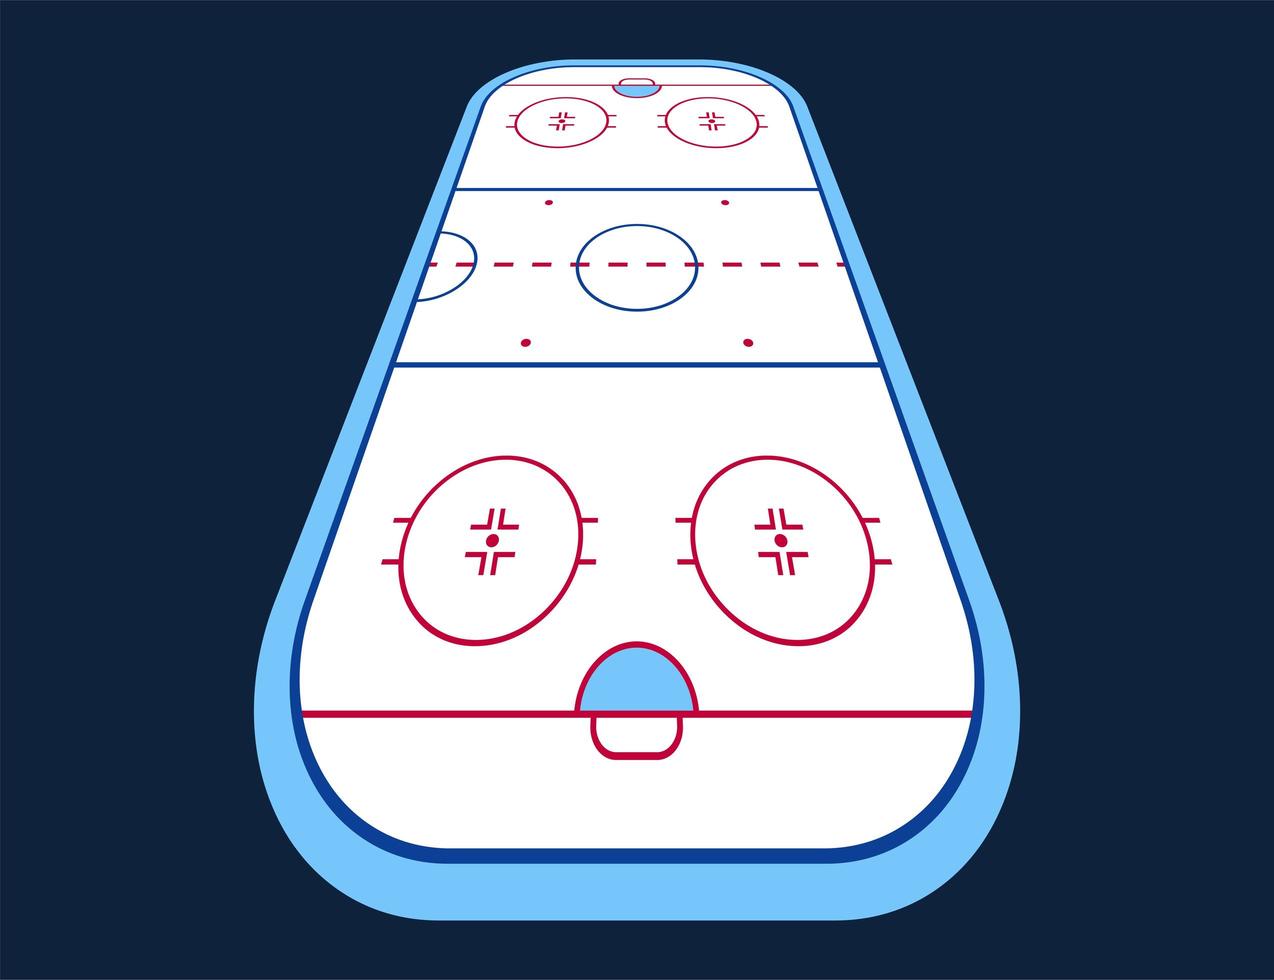 Perspective vector of ice hockey rink. Textures blue ice. Ice rink. top view. Vector illustration background.